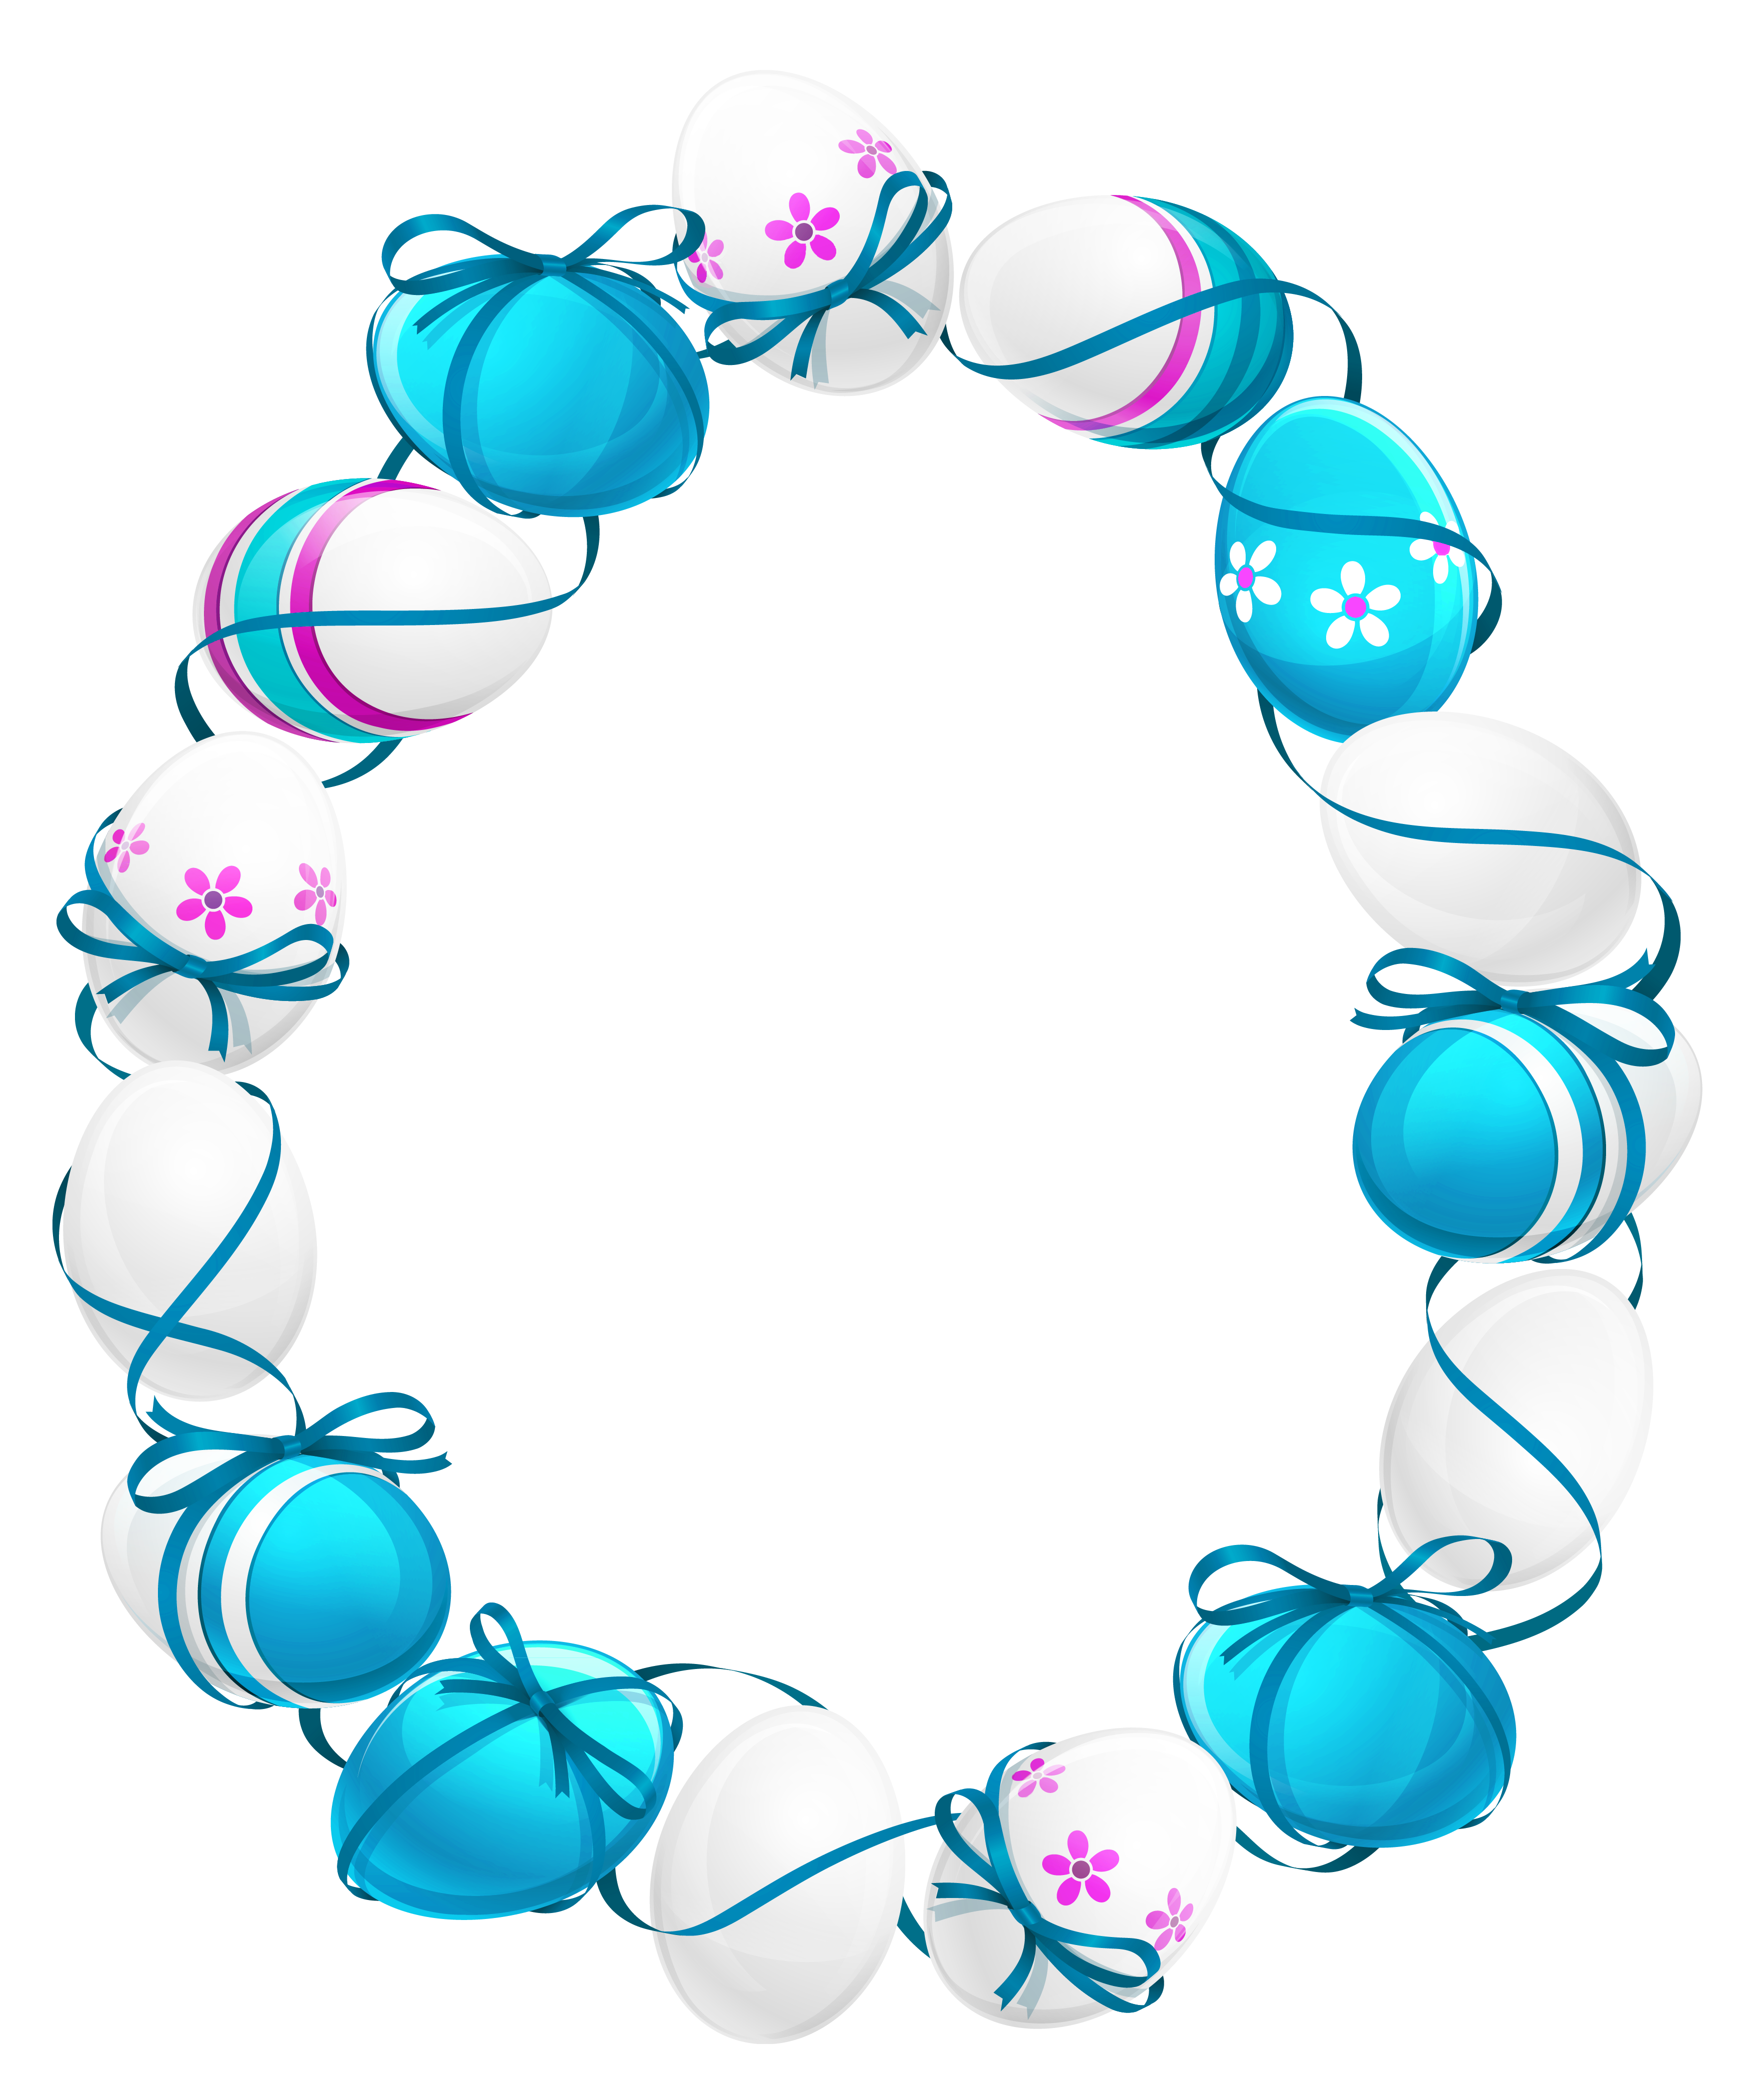 Oval clipart oval egg. Easter frame png picture